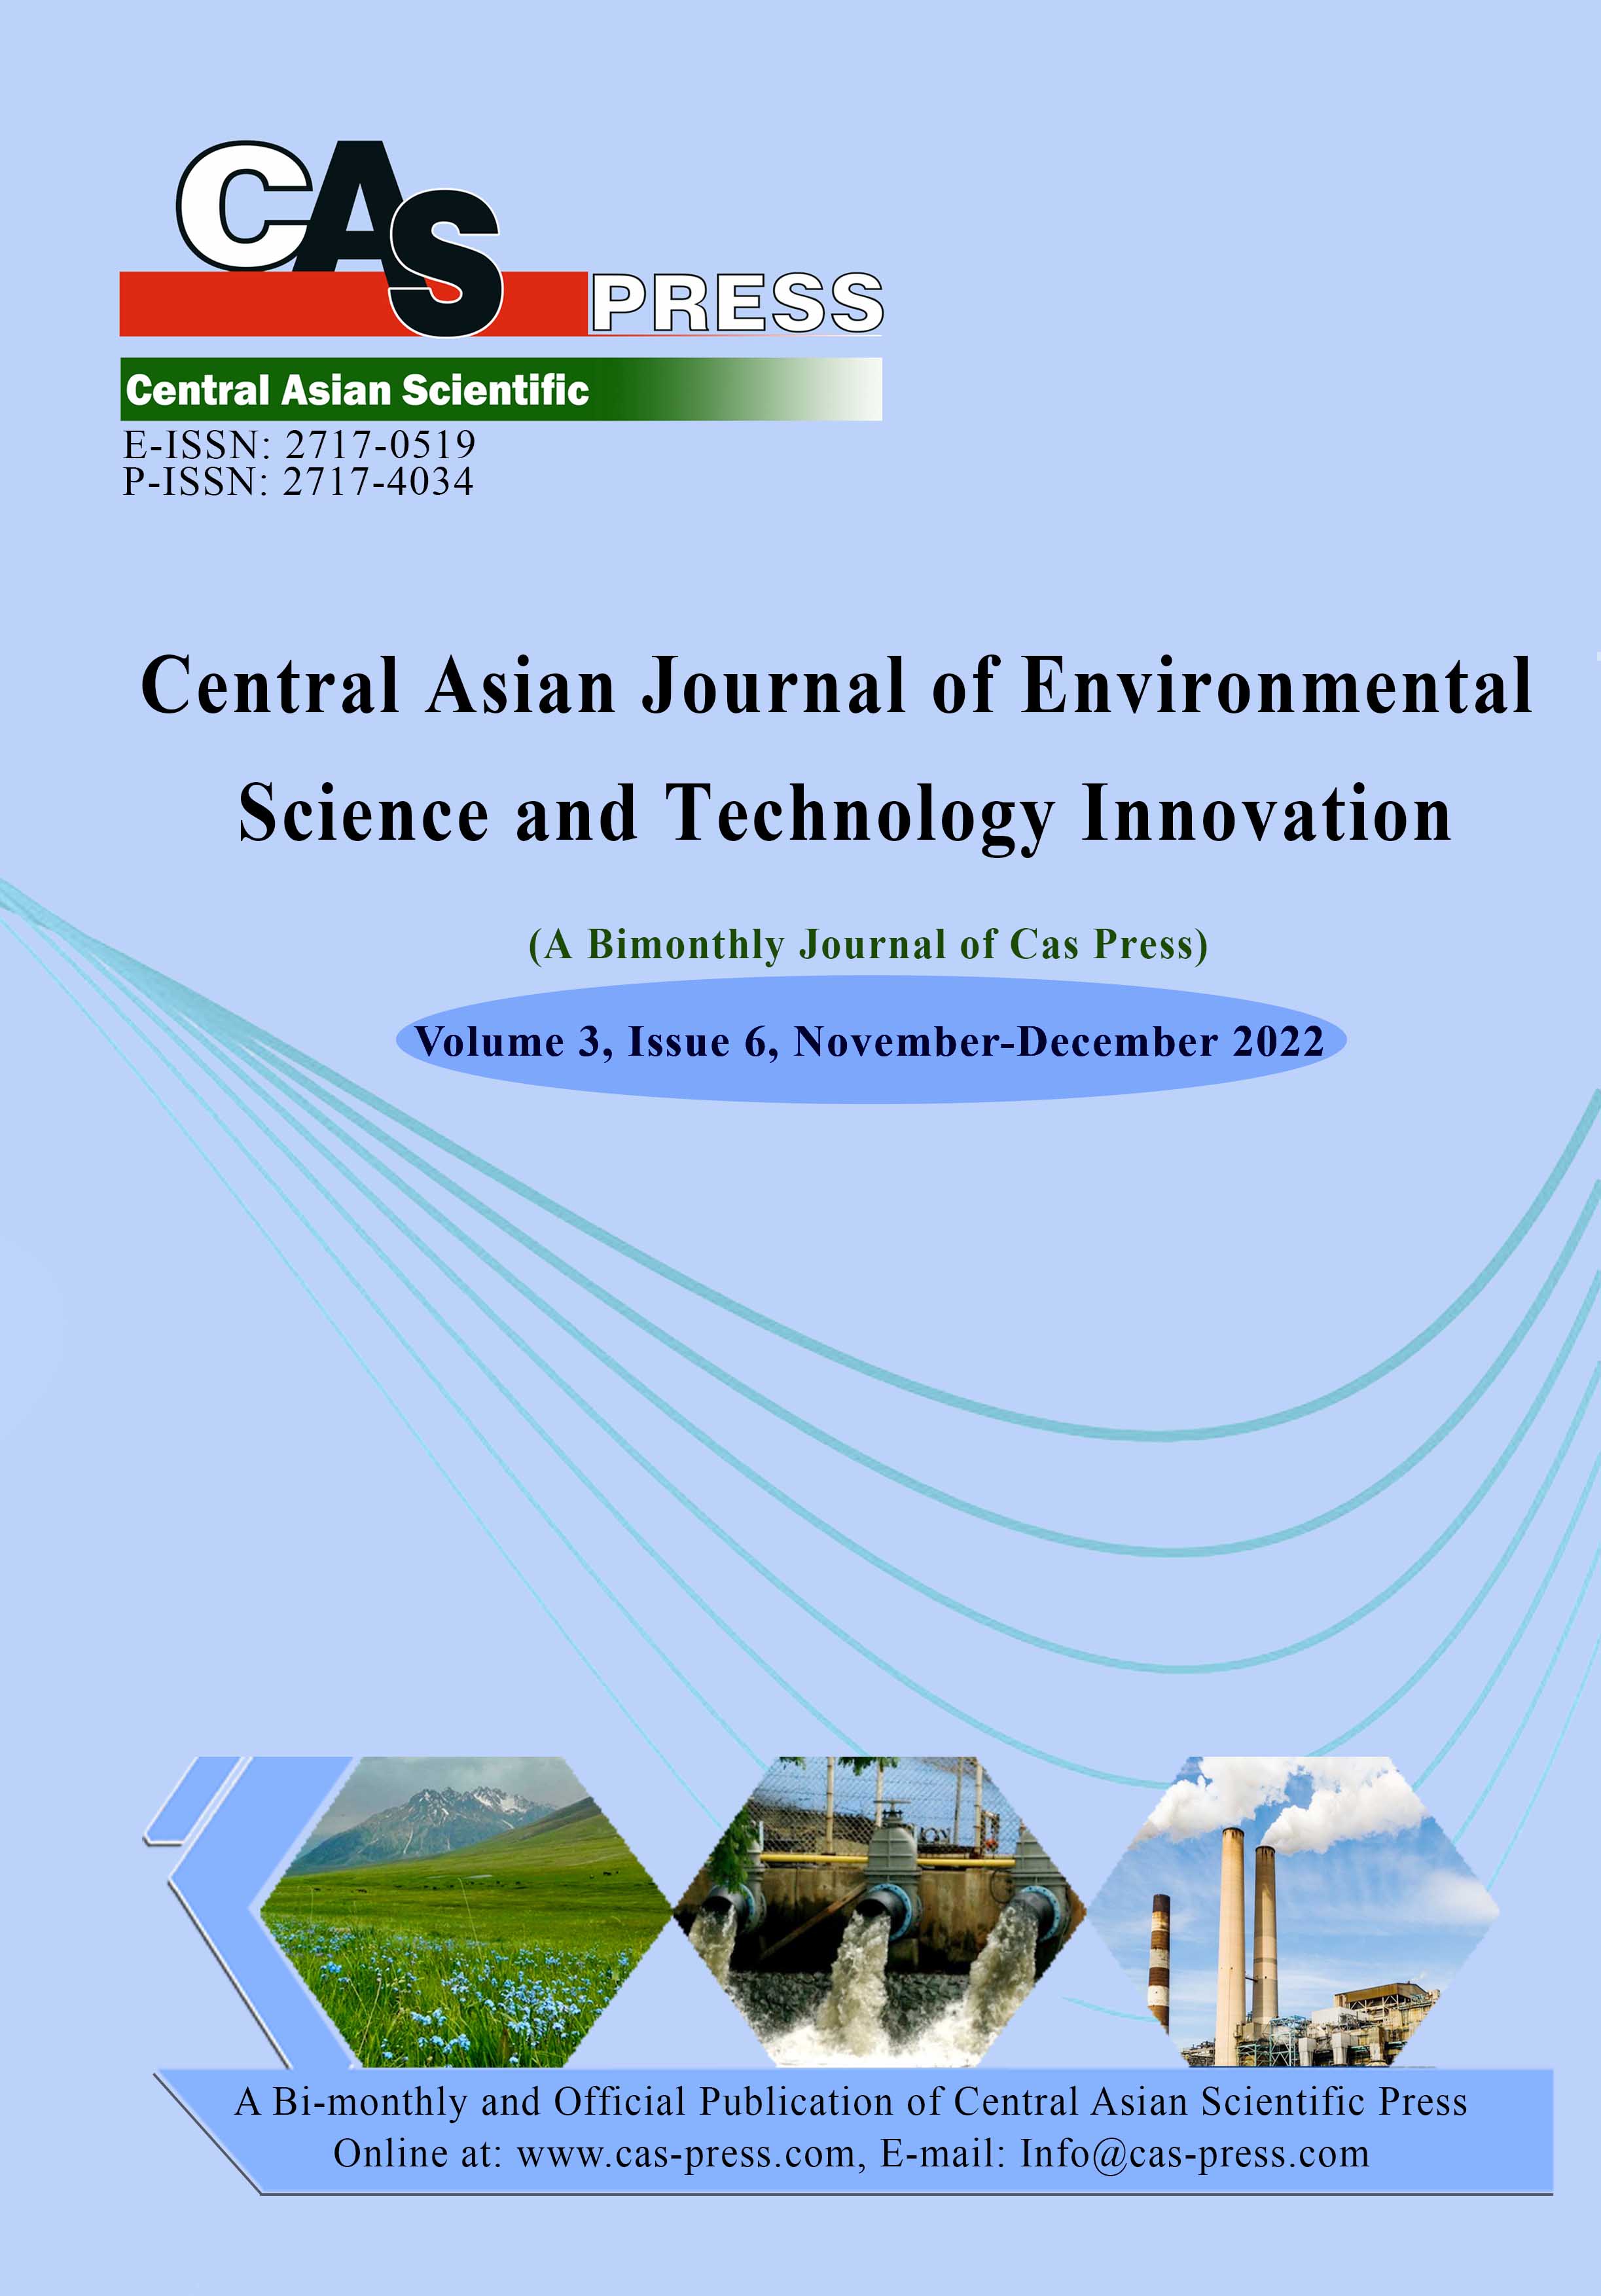 Central Asian Journal of Environmental Science and Technology Innovation